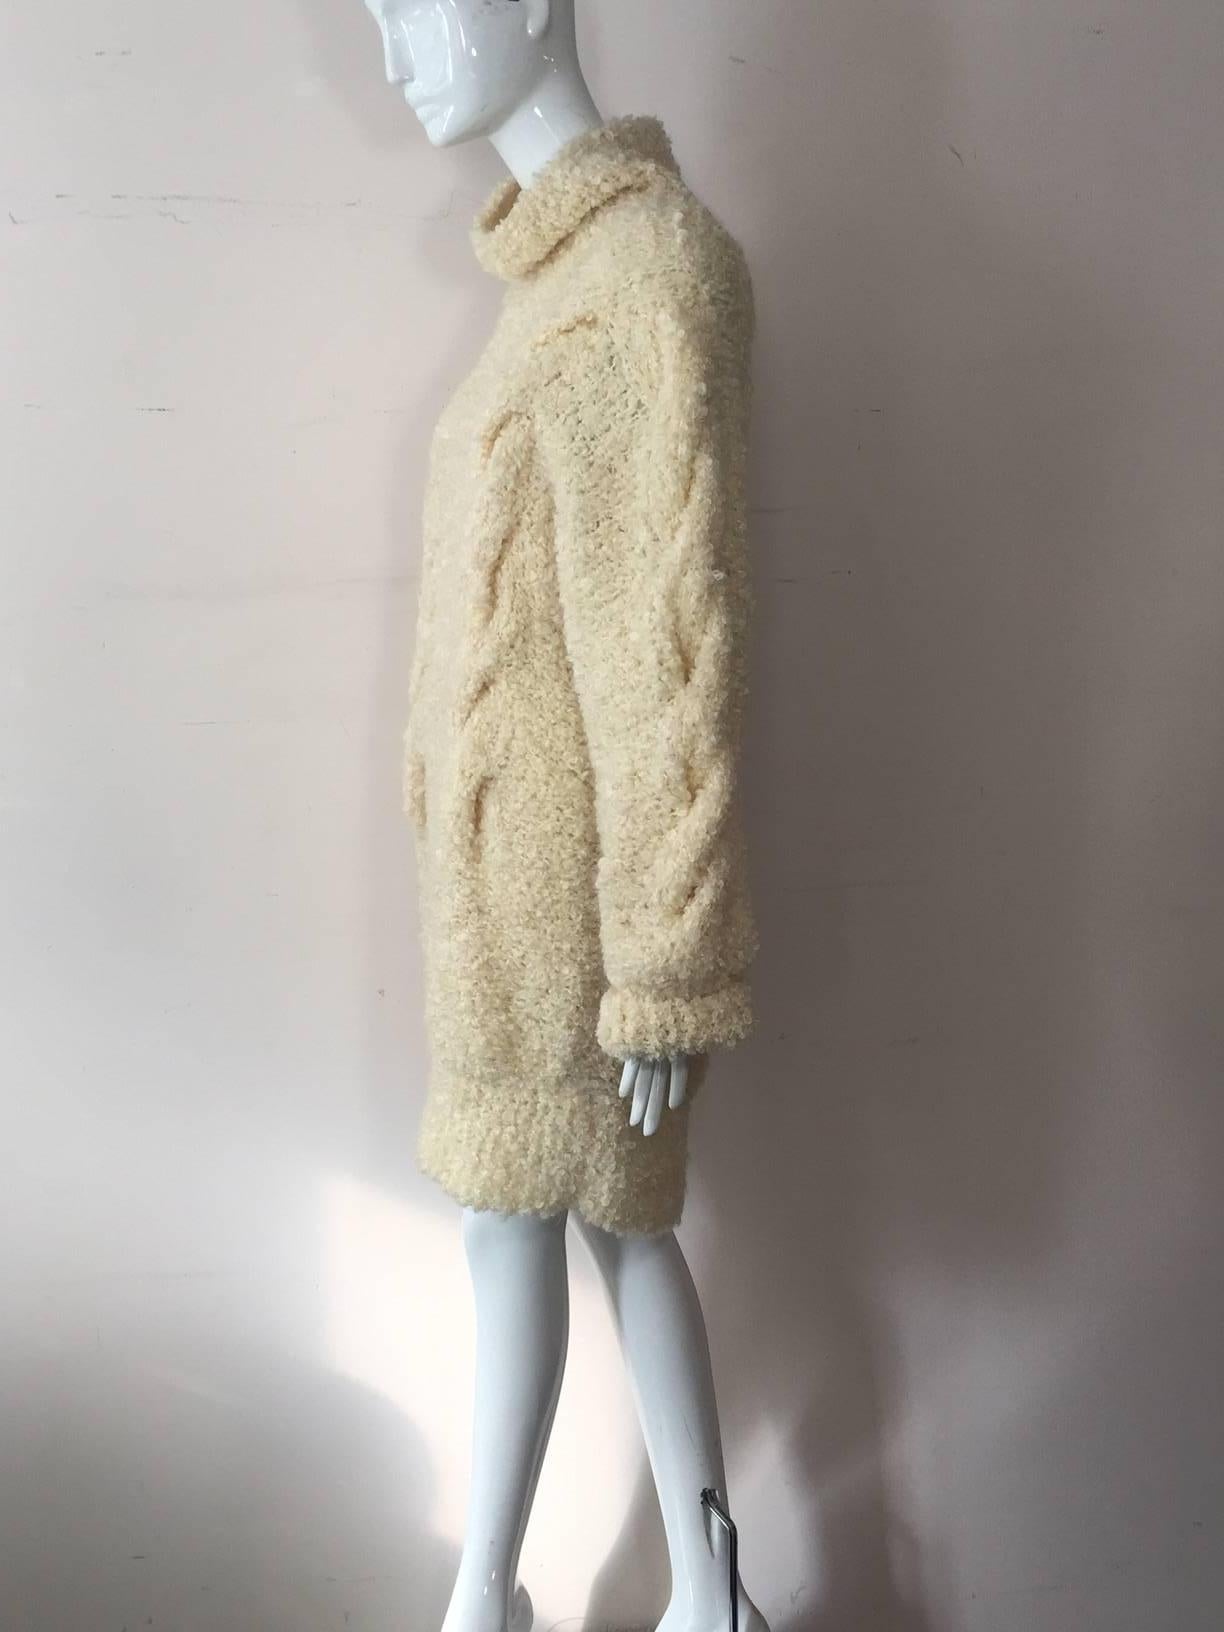 A fabulous cozy 1990s Audrey Daniels boucle cable knit sweater dress in ivory wool